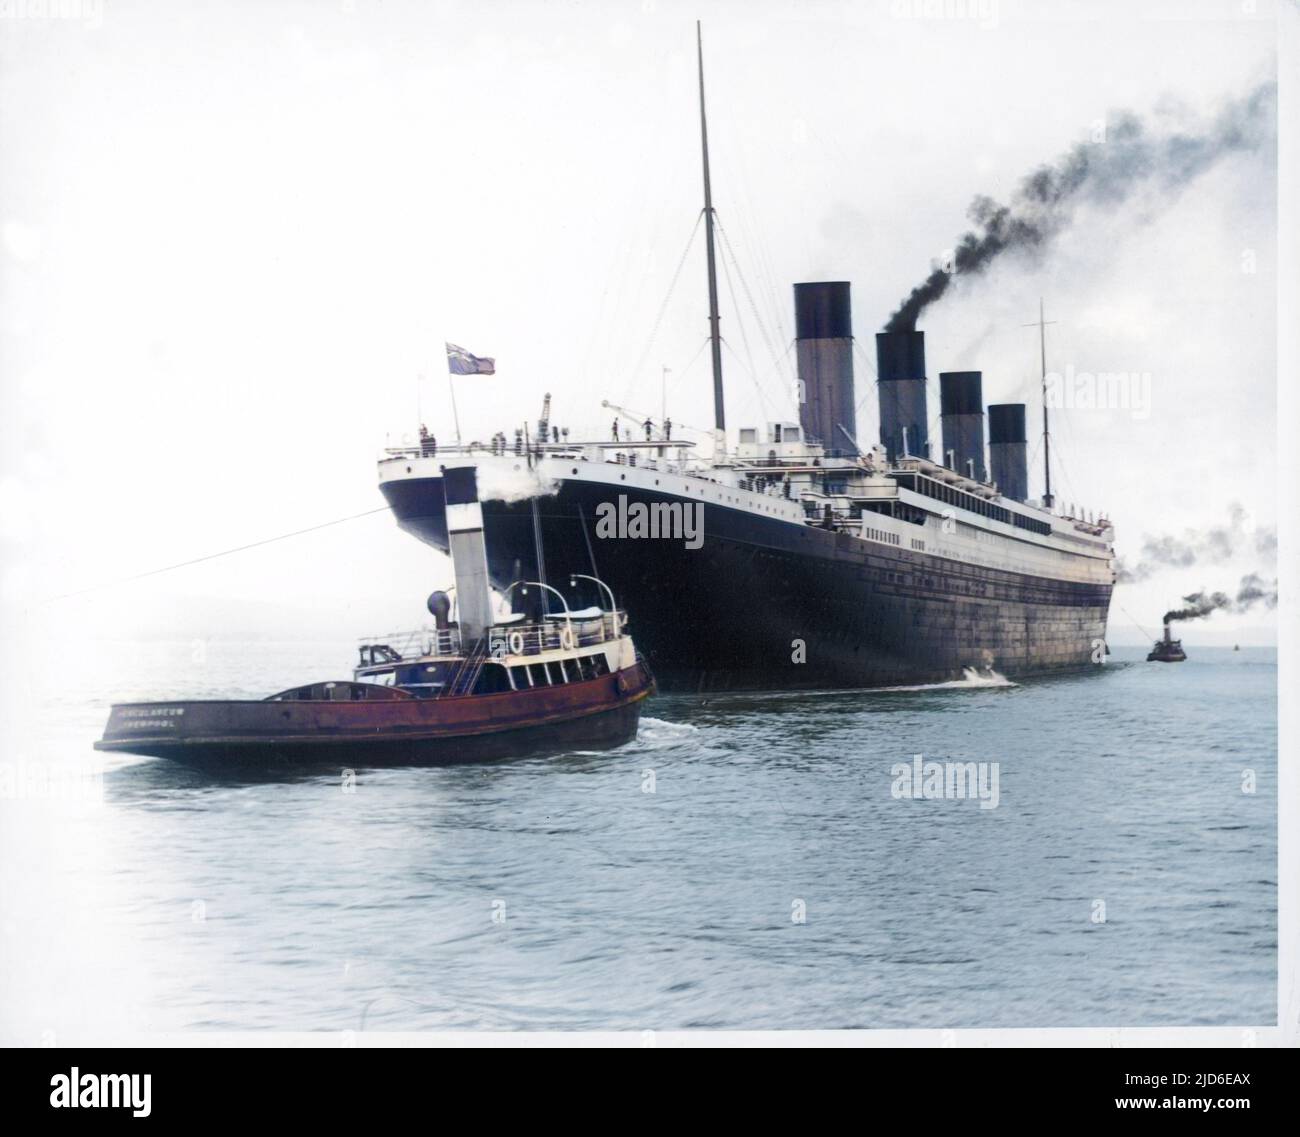 The Titanic leaving Belfast, Ireland, for Southampton, England for its maiden voyage New York, USA. It was built in Belfast 1909-1911, and fitted and furnished there 1911-1912. The photograph shows the stern of the ship. Colourised version of : 10140597       Date: 02-Apr-12 Stock Photo